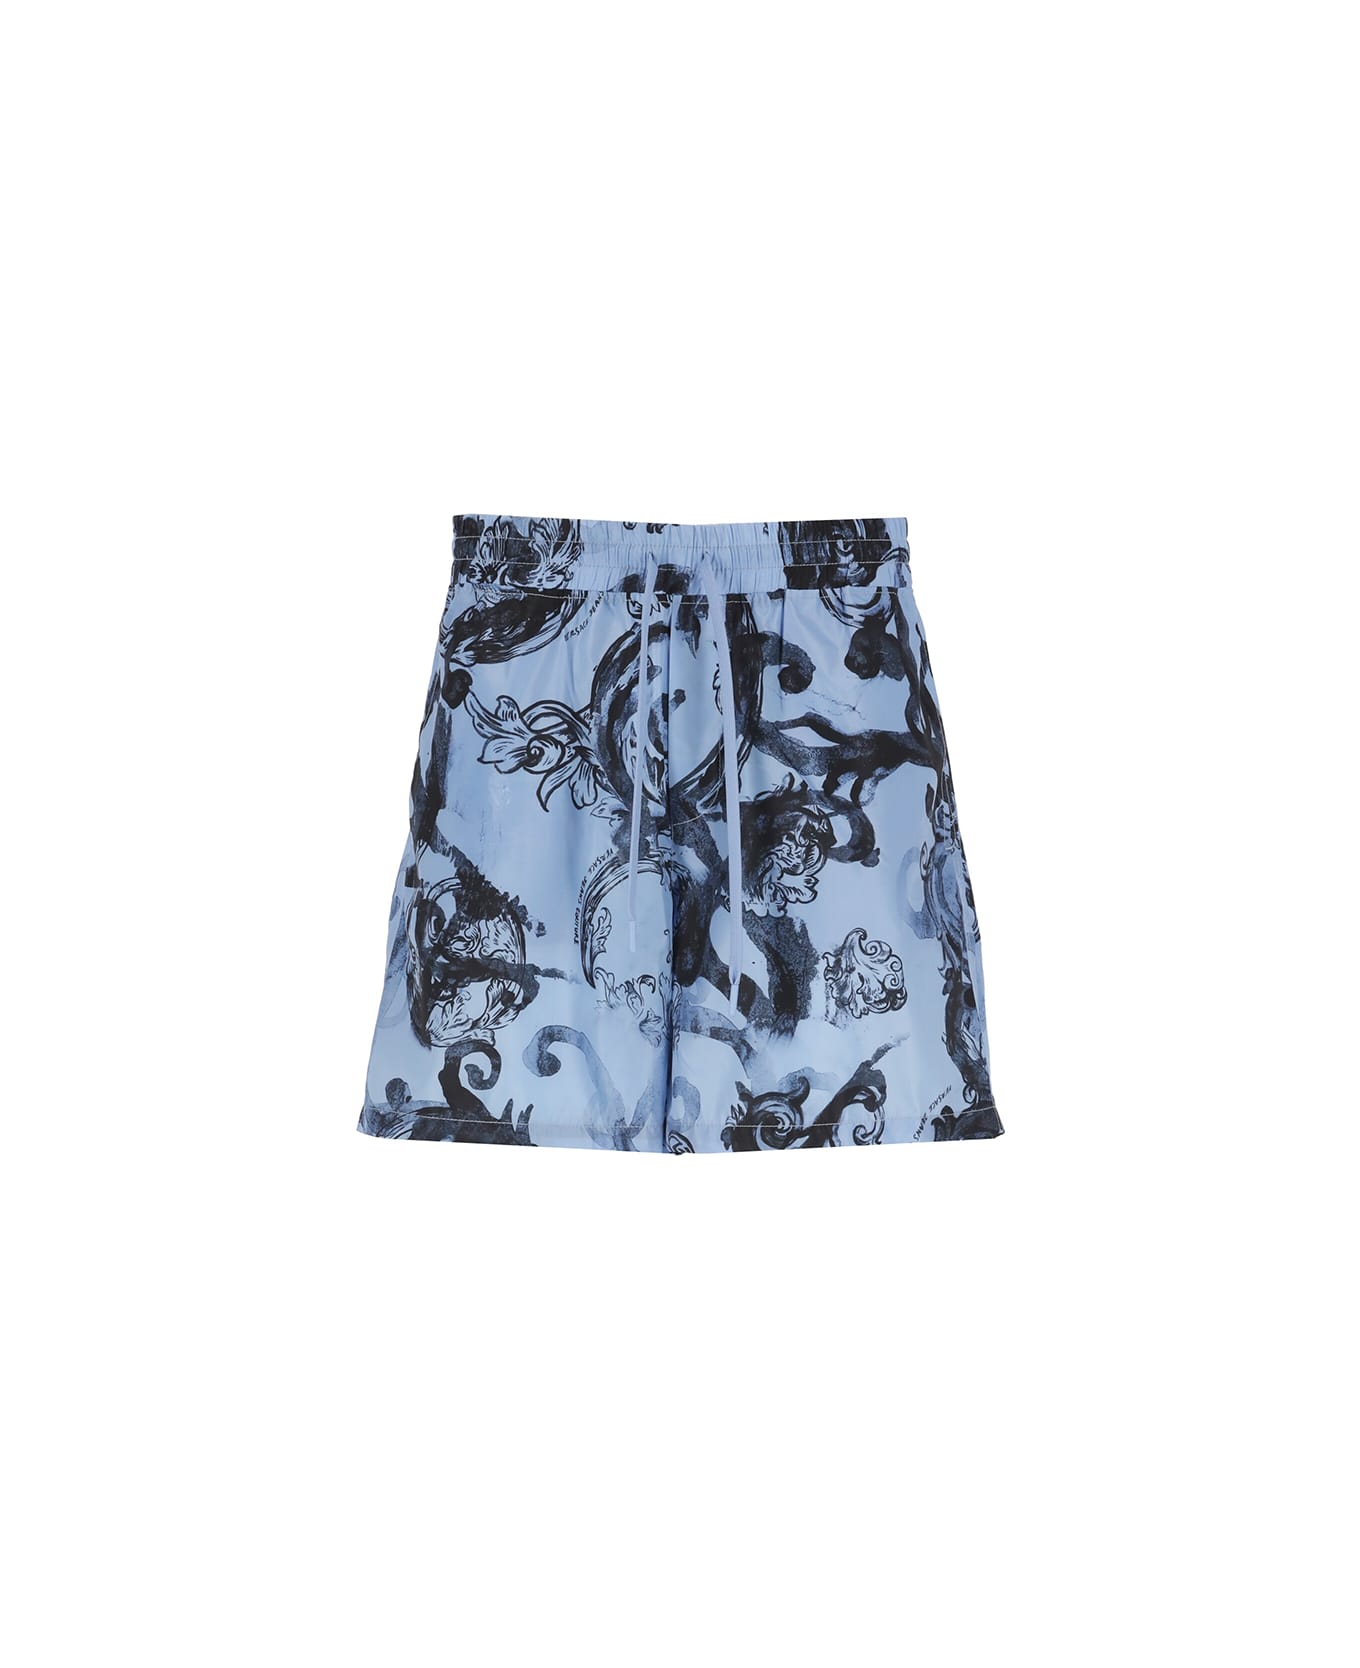 Versace Jeans Couture Swim Trunks With Watercolor Print - Light Blue スイムトランクス